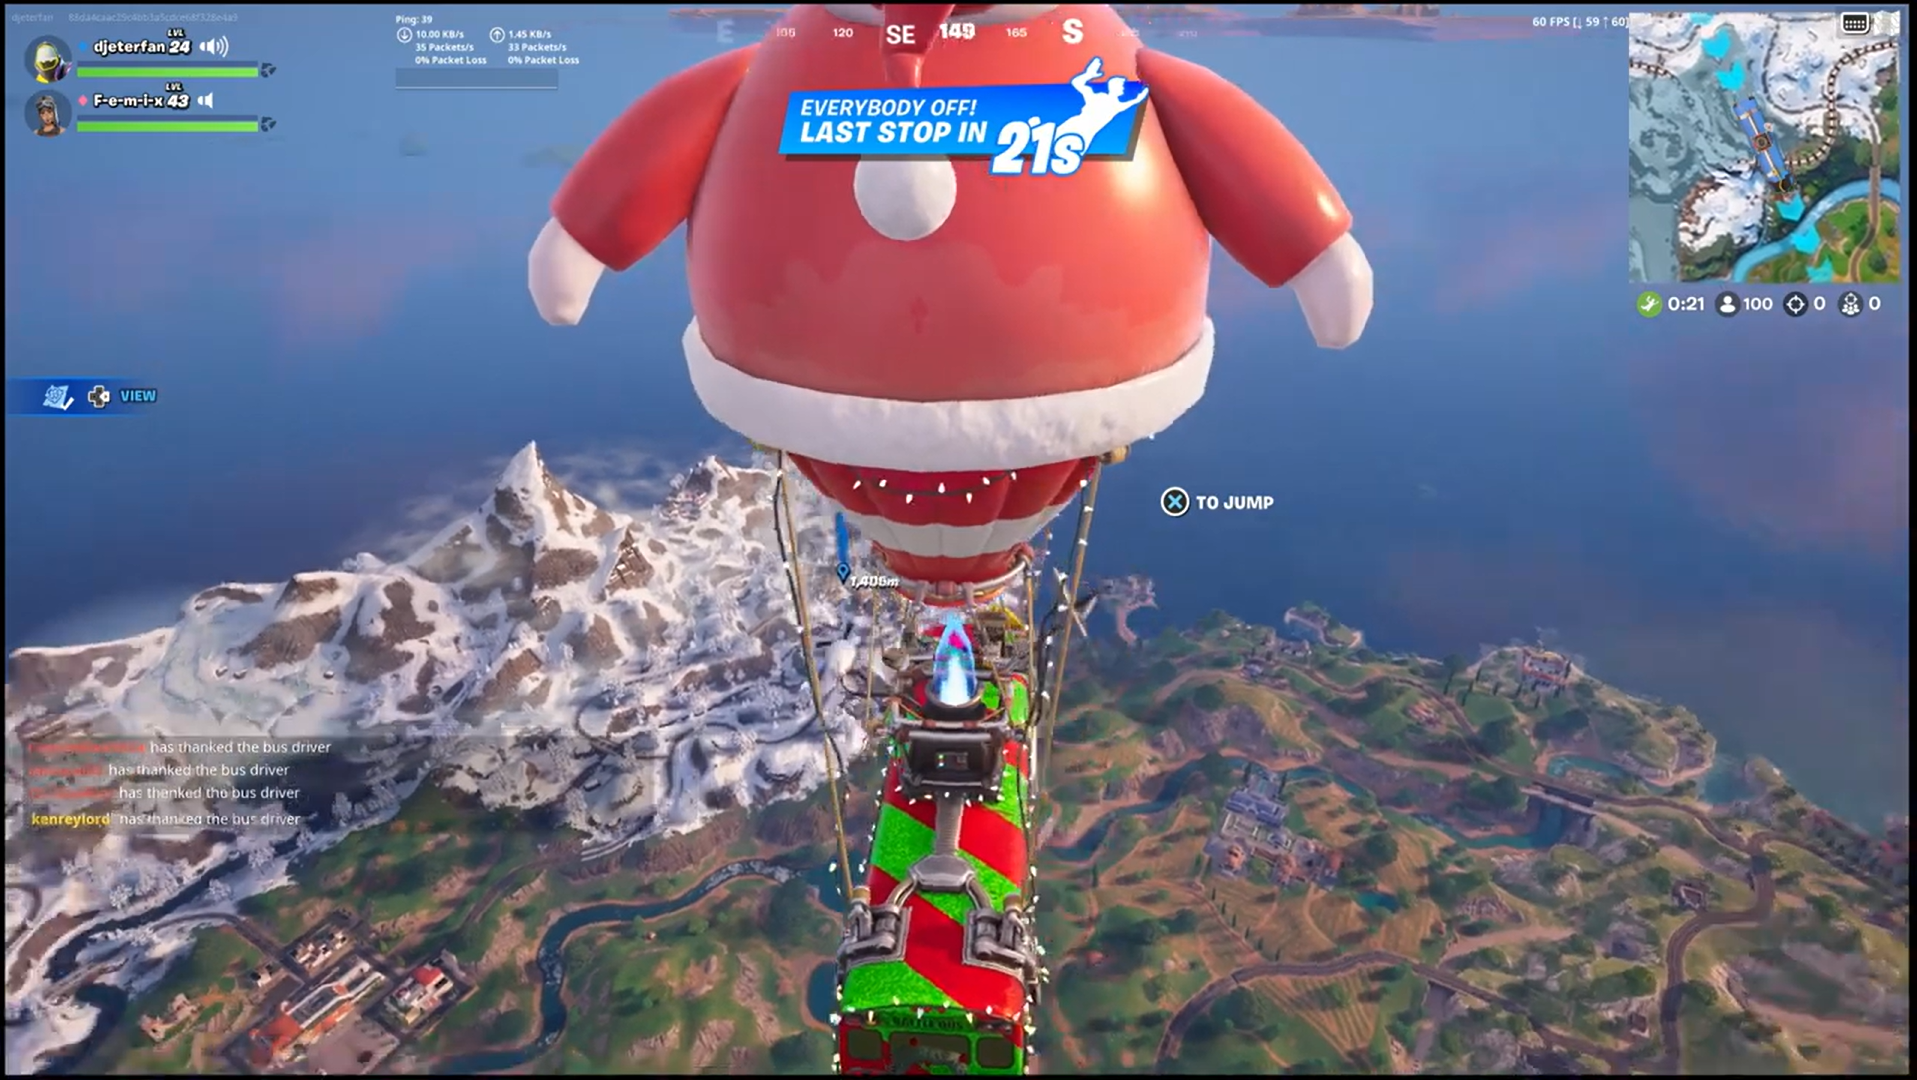 How to Visit a ship it Express Location Fortnite Winterfest Challenges